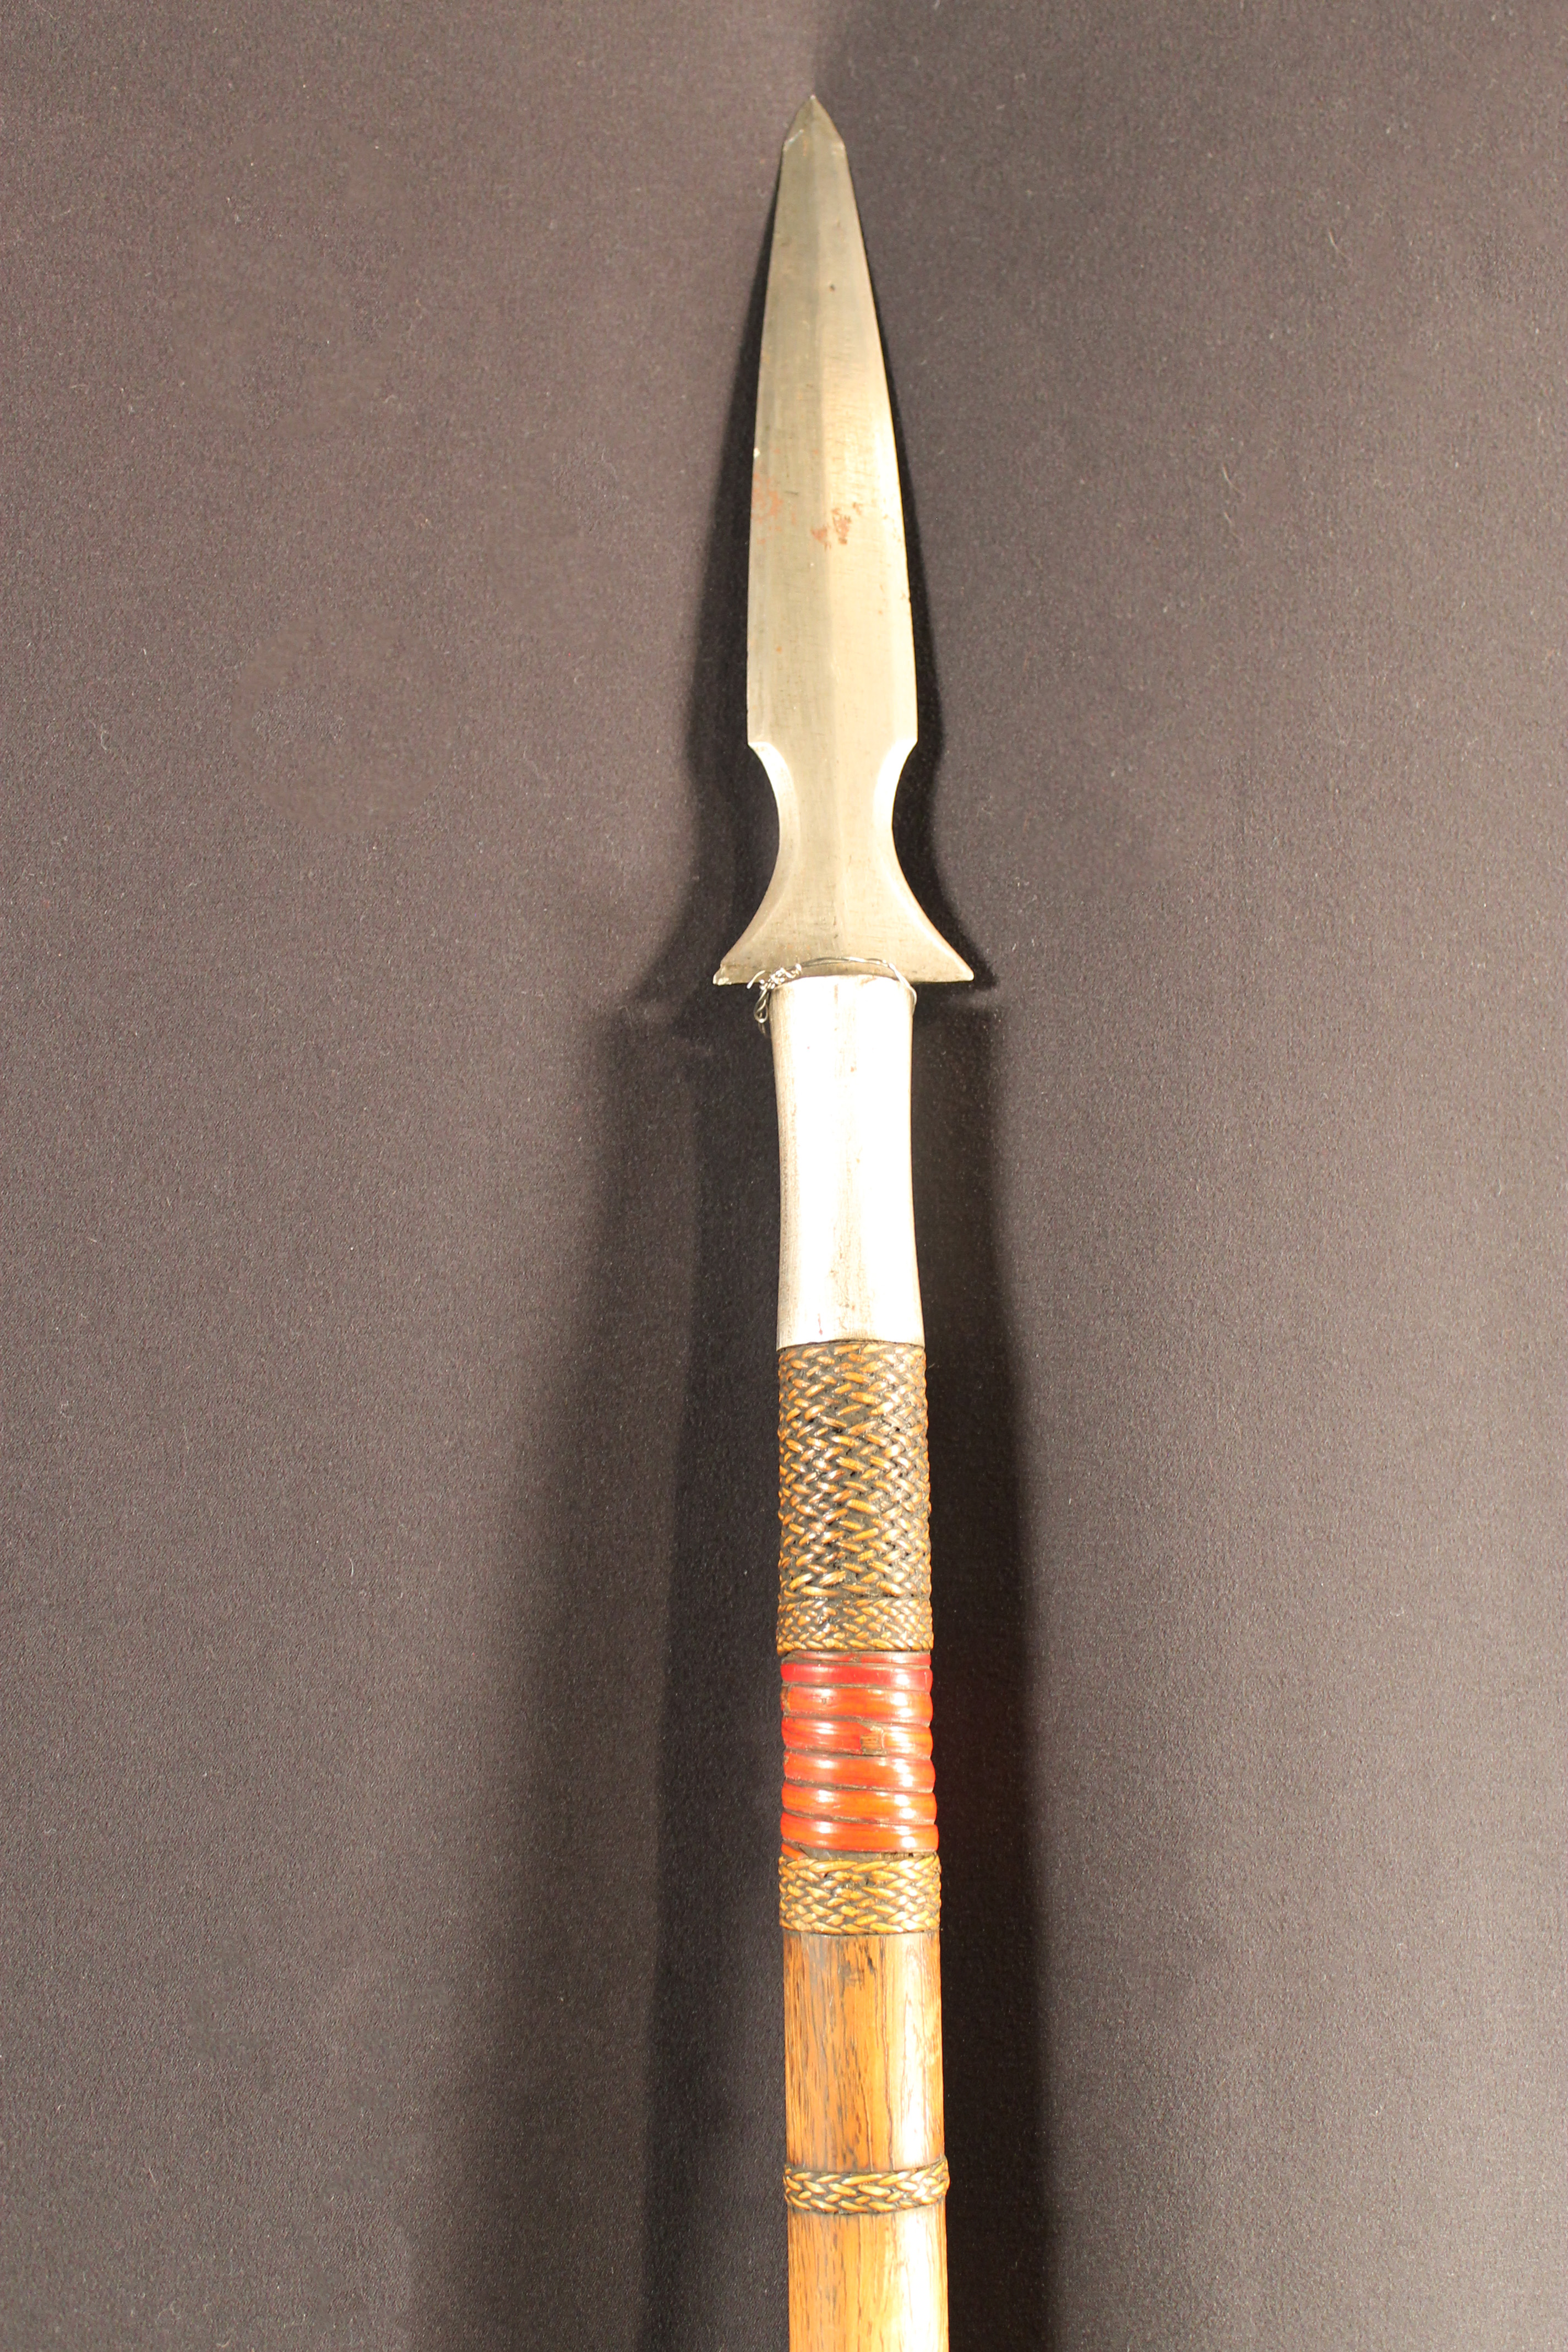 Spear head made of metal